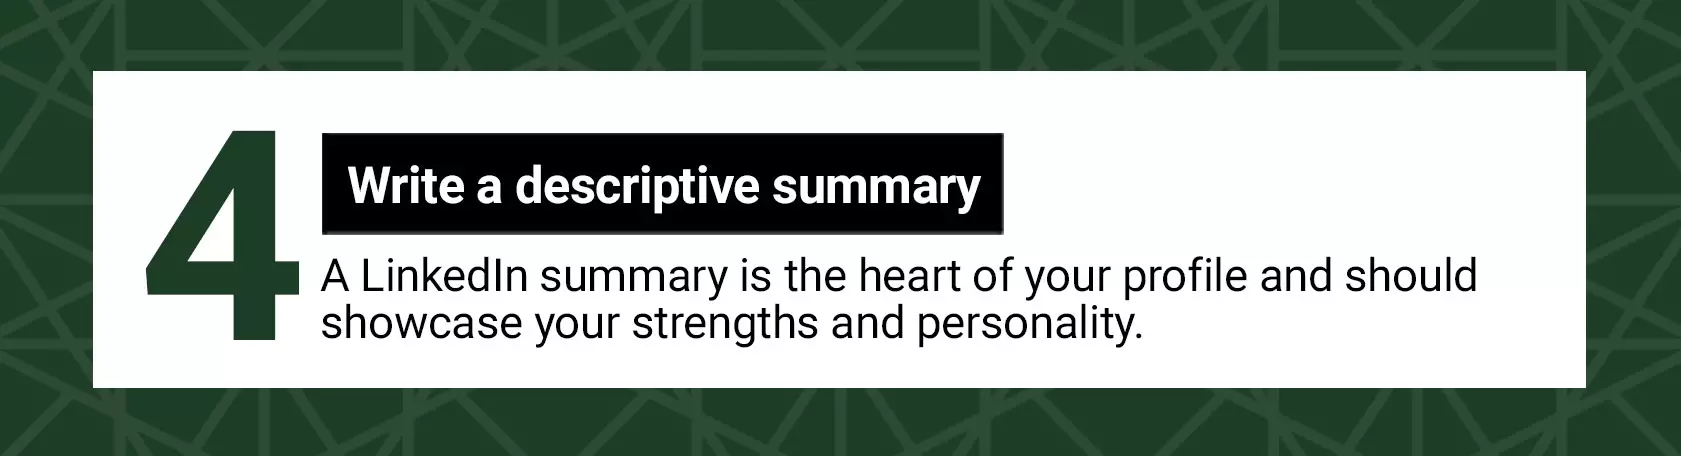 4 Write a descriptive summary. A LinkedIn summary is the heart of your profile and should showcase your strengths and personality.